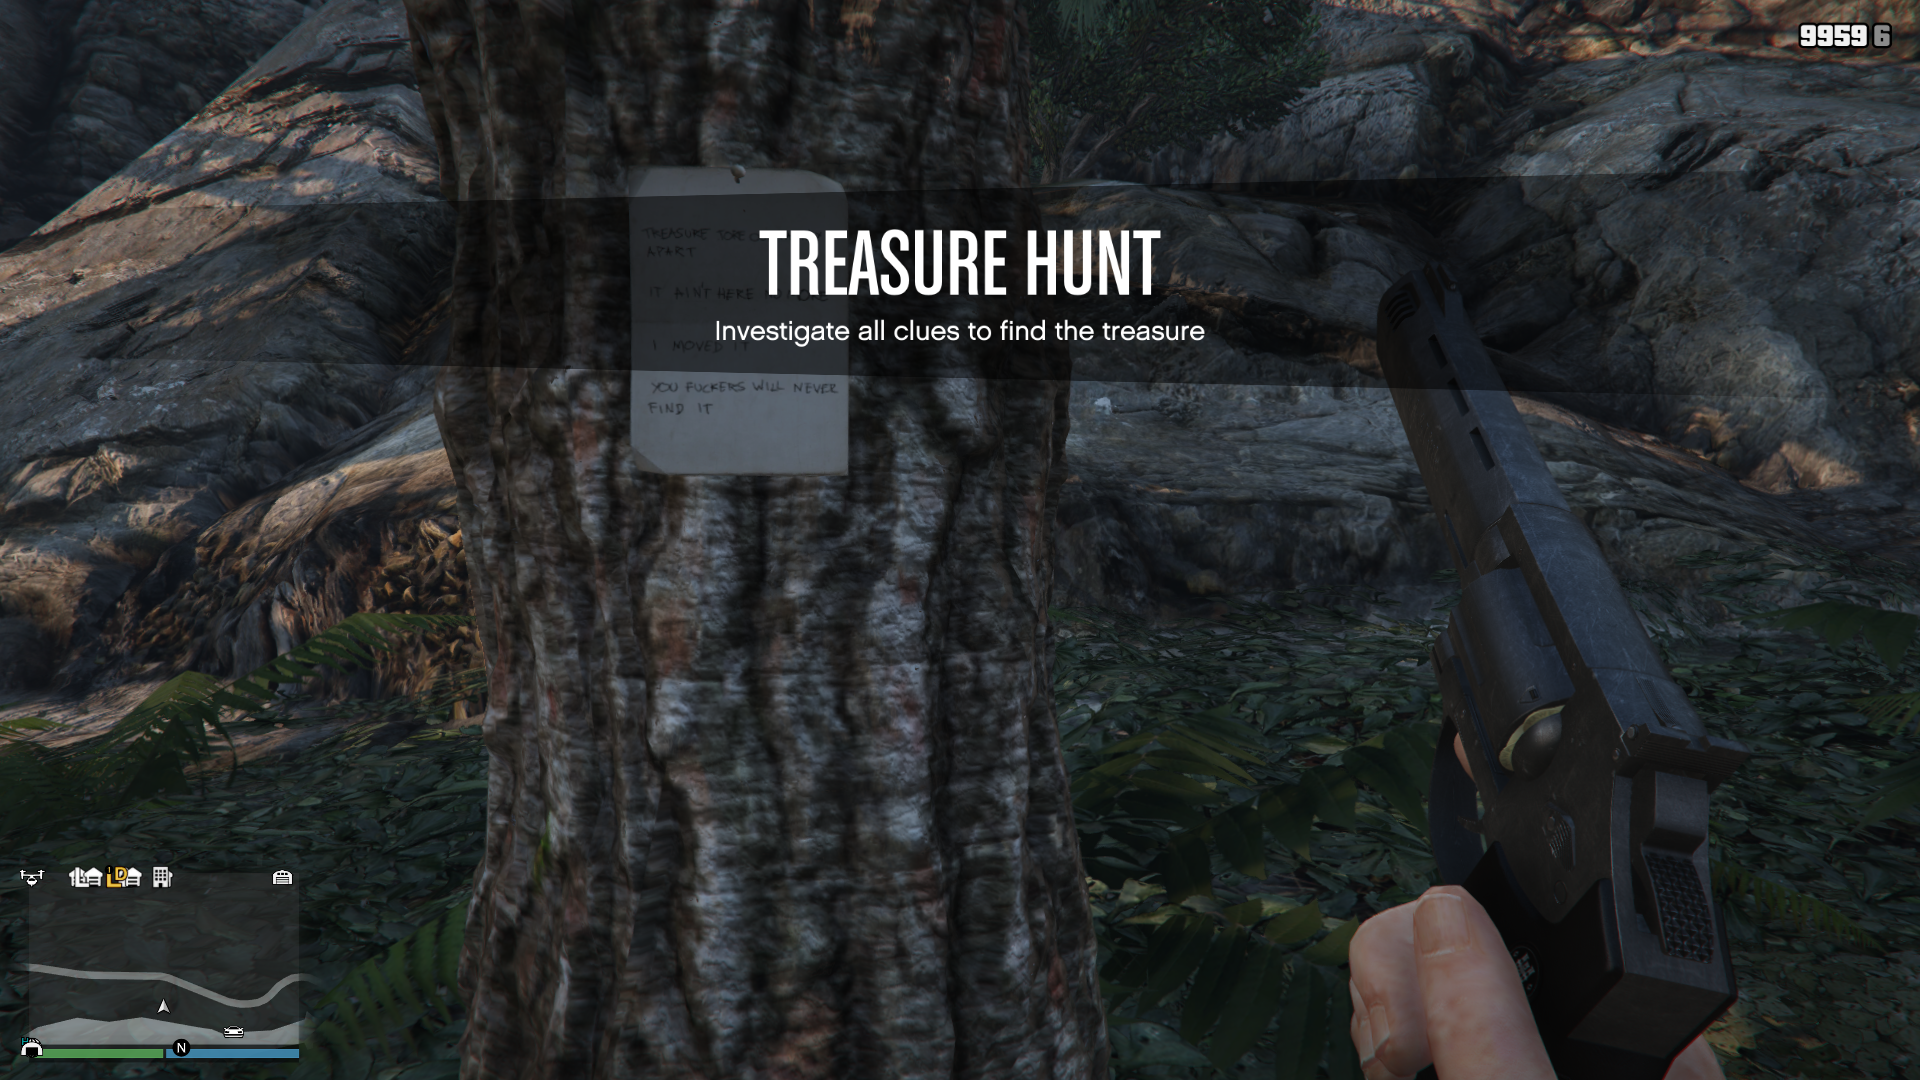 gta v treasure hunt which one of the three question marks